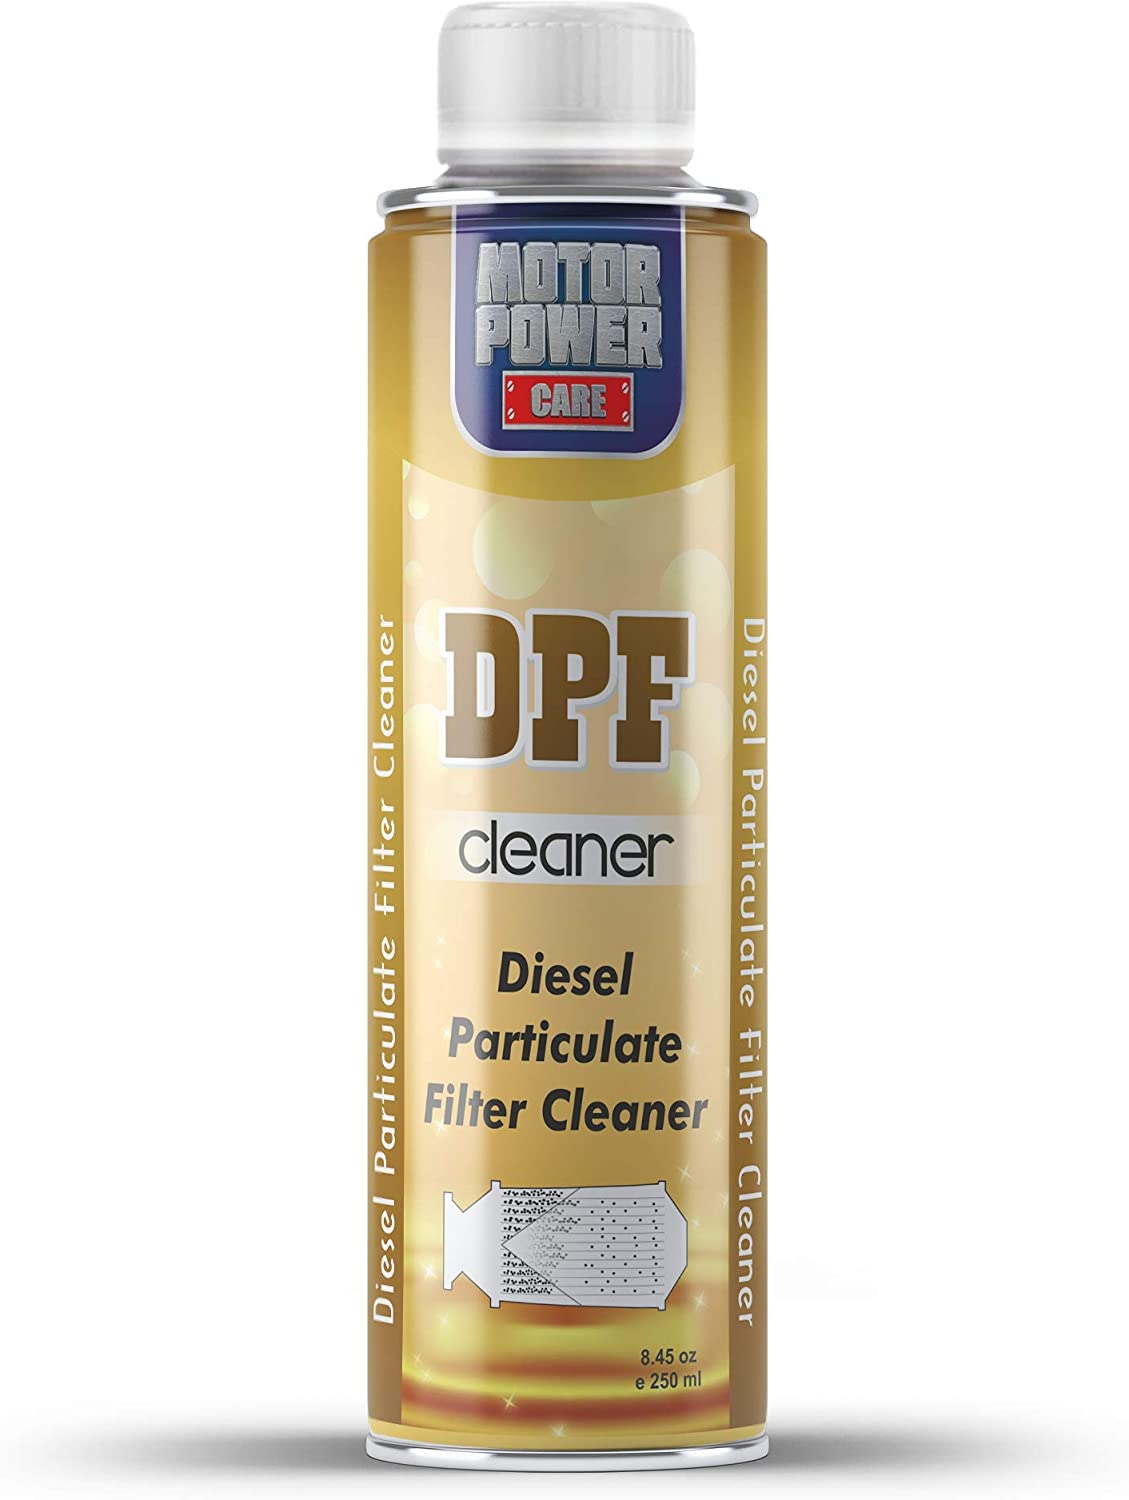 <strong>2. Diesel particulate Filter Cleaner</strong>